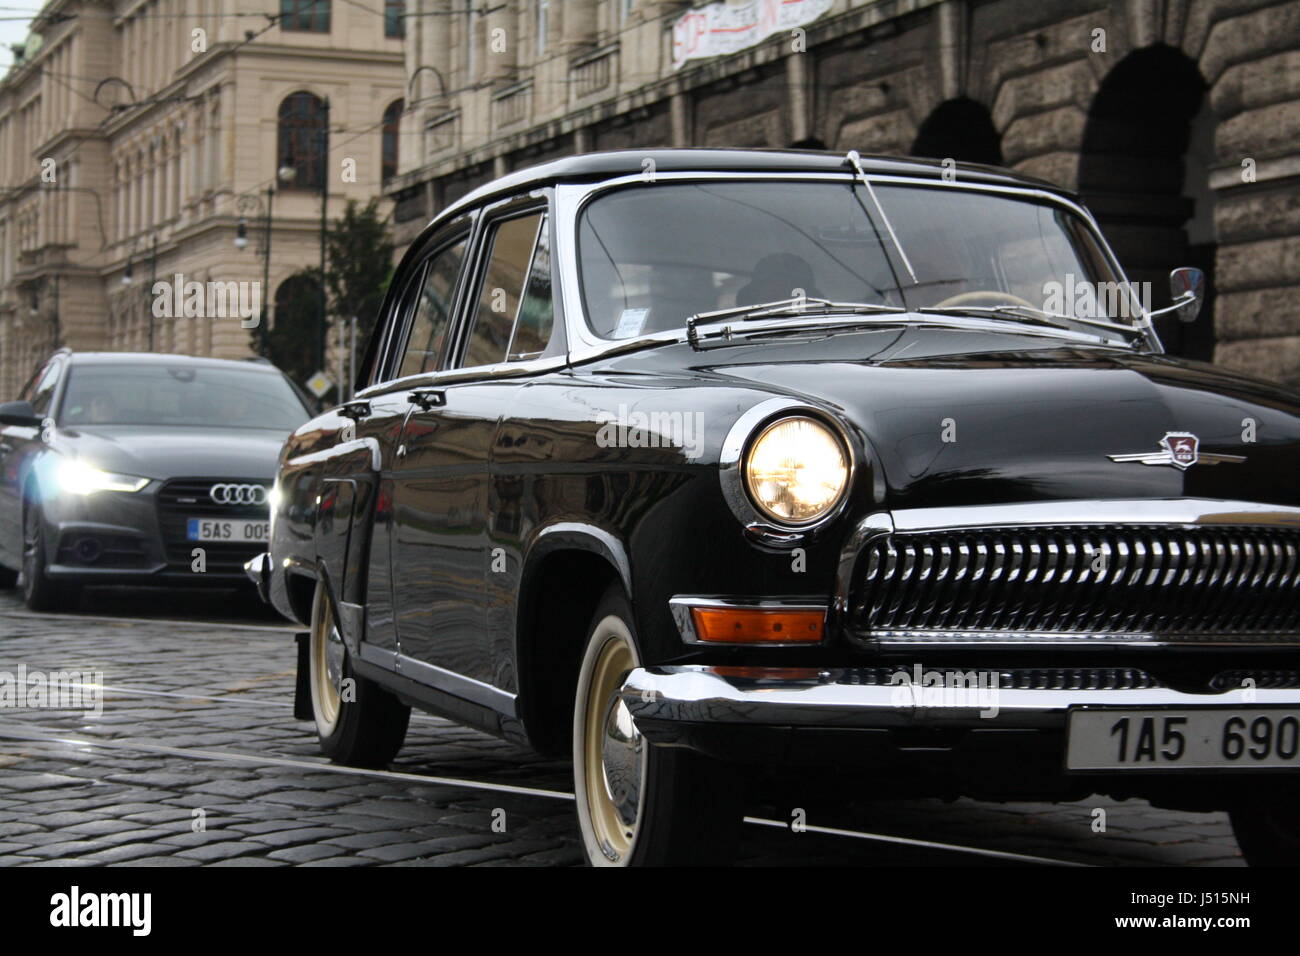 Soviet car Volga GAZ in Prague city street, picture was made on May 8th when Europe and world celebrates end of world war 2. Stock Photo